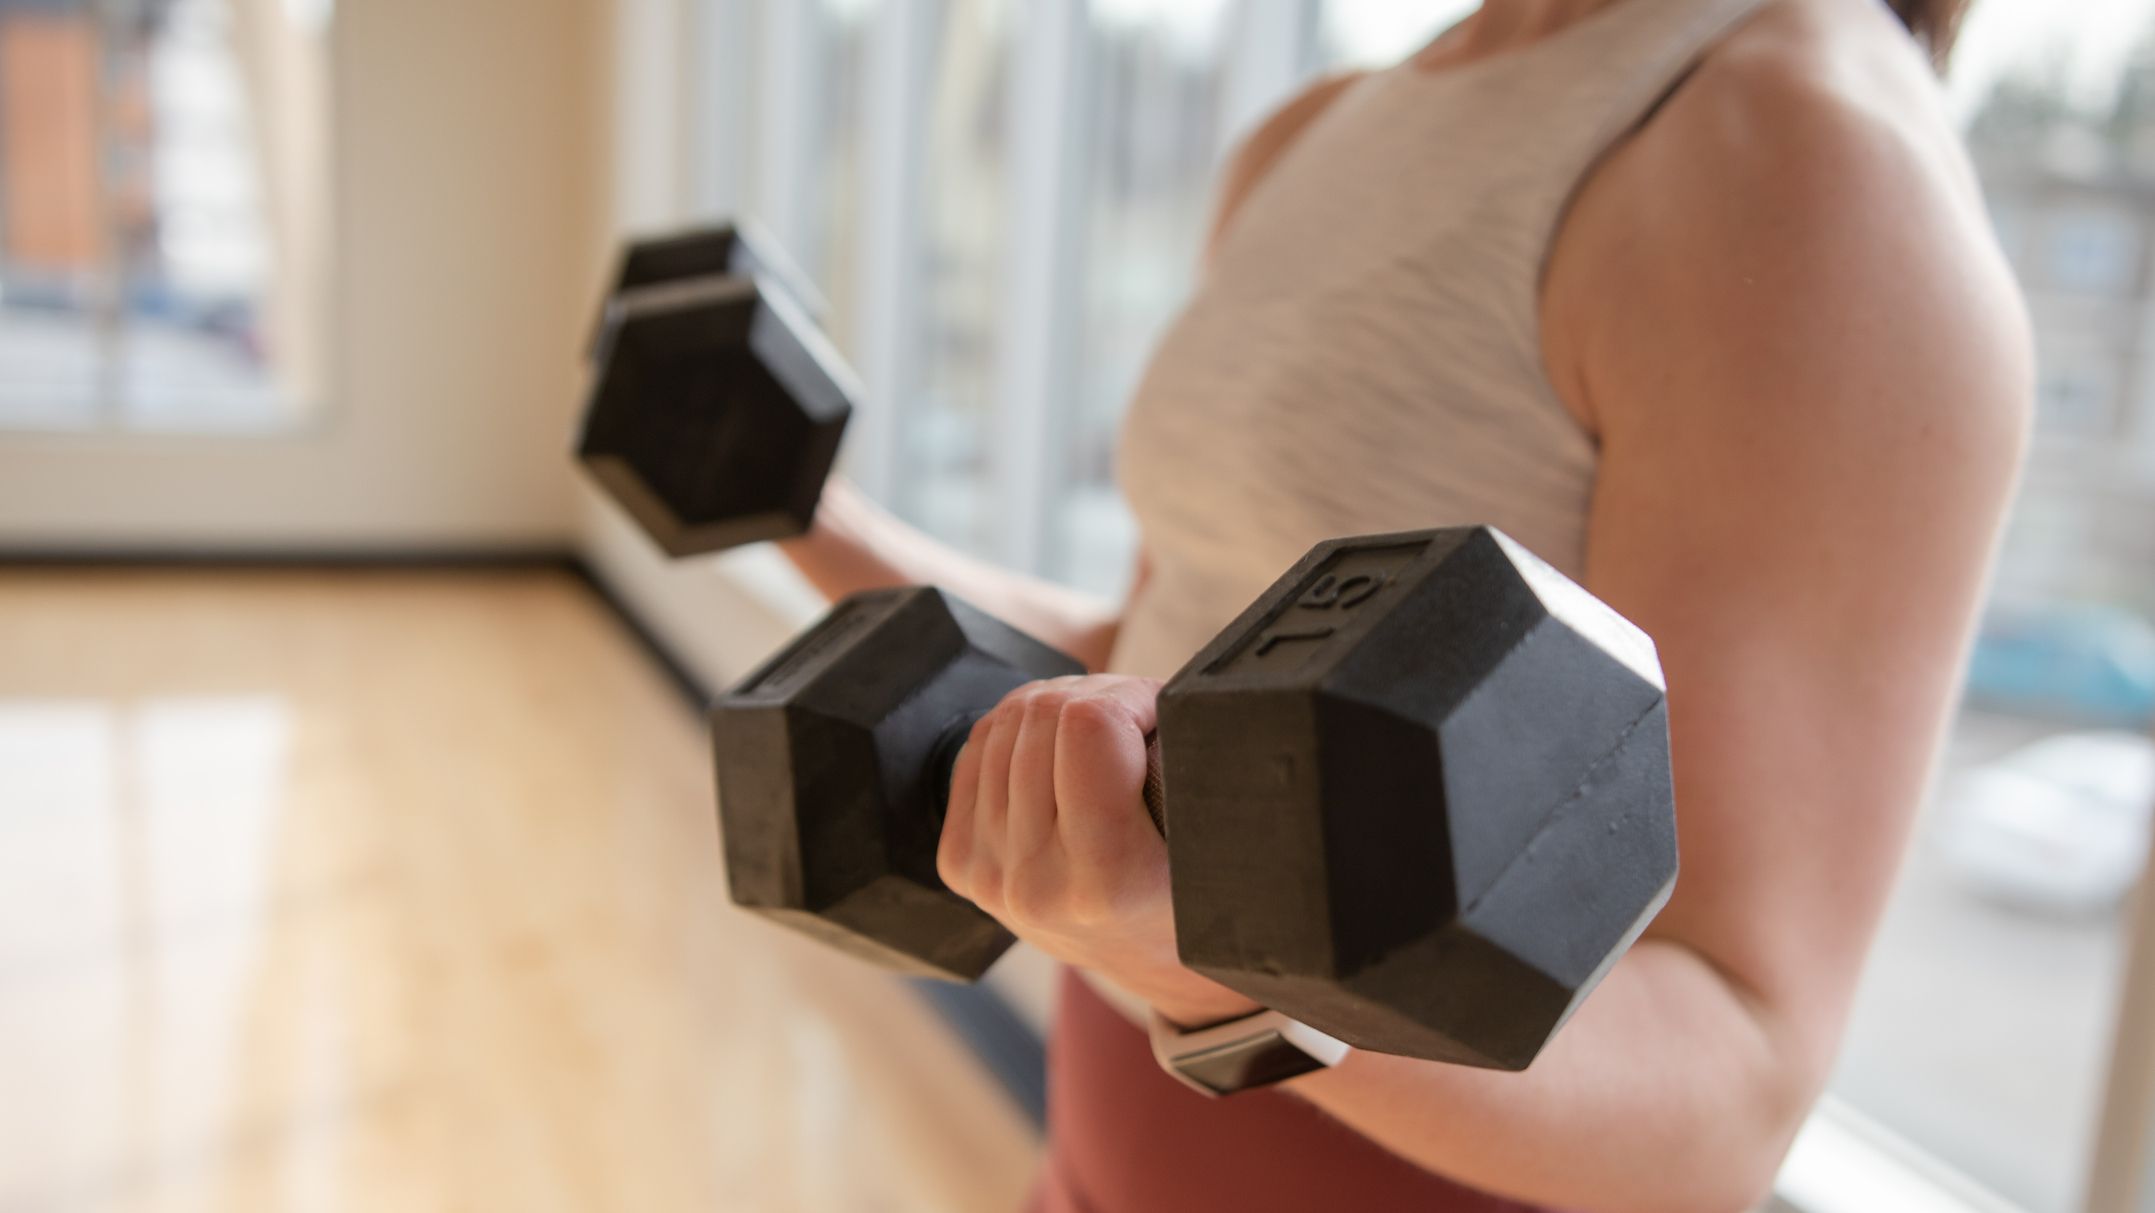 https://hips.hearstapps.com/hmg-prod/images/low-section-of-woman-exercising-with-dumbbells-at-royalty-free-image-1647548948.jpg?crop=1xw:0.87119xh;center,top